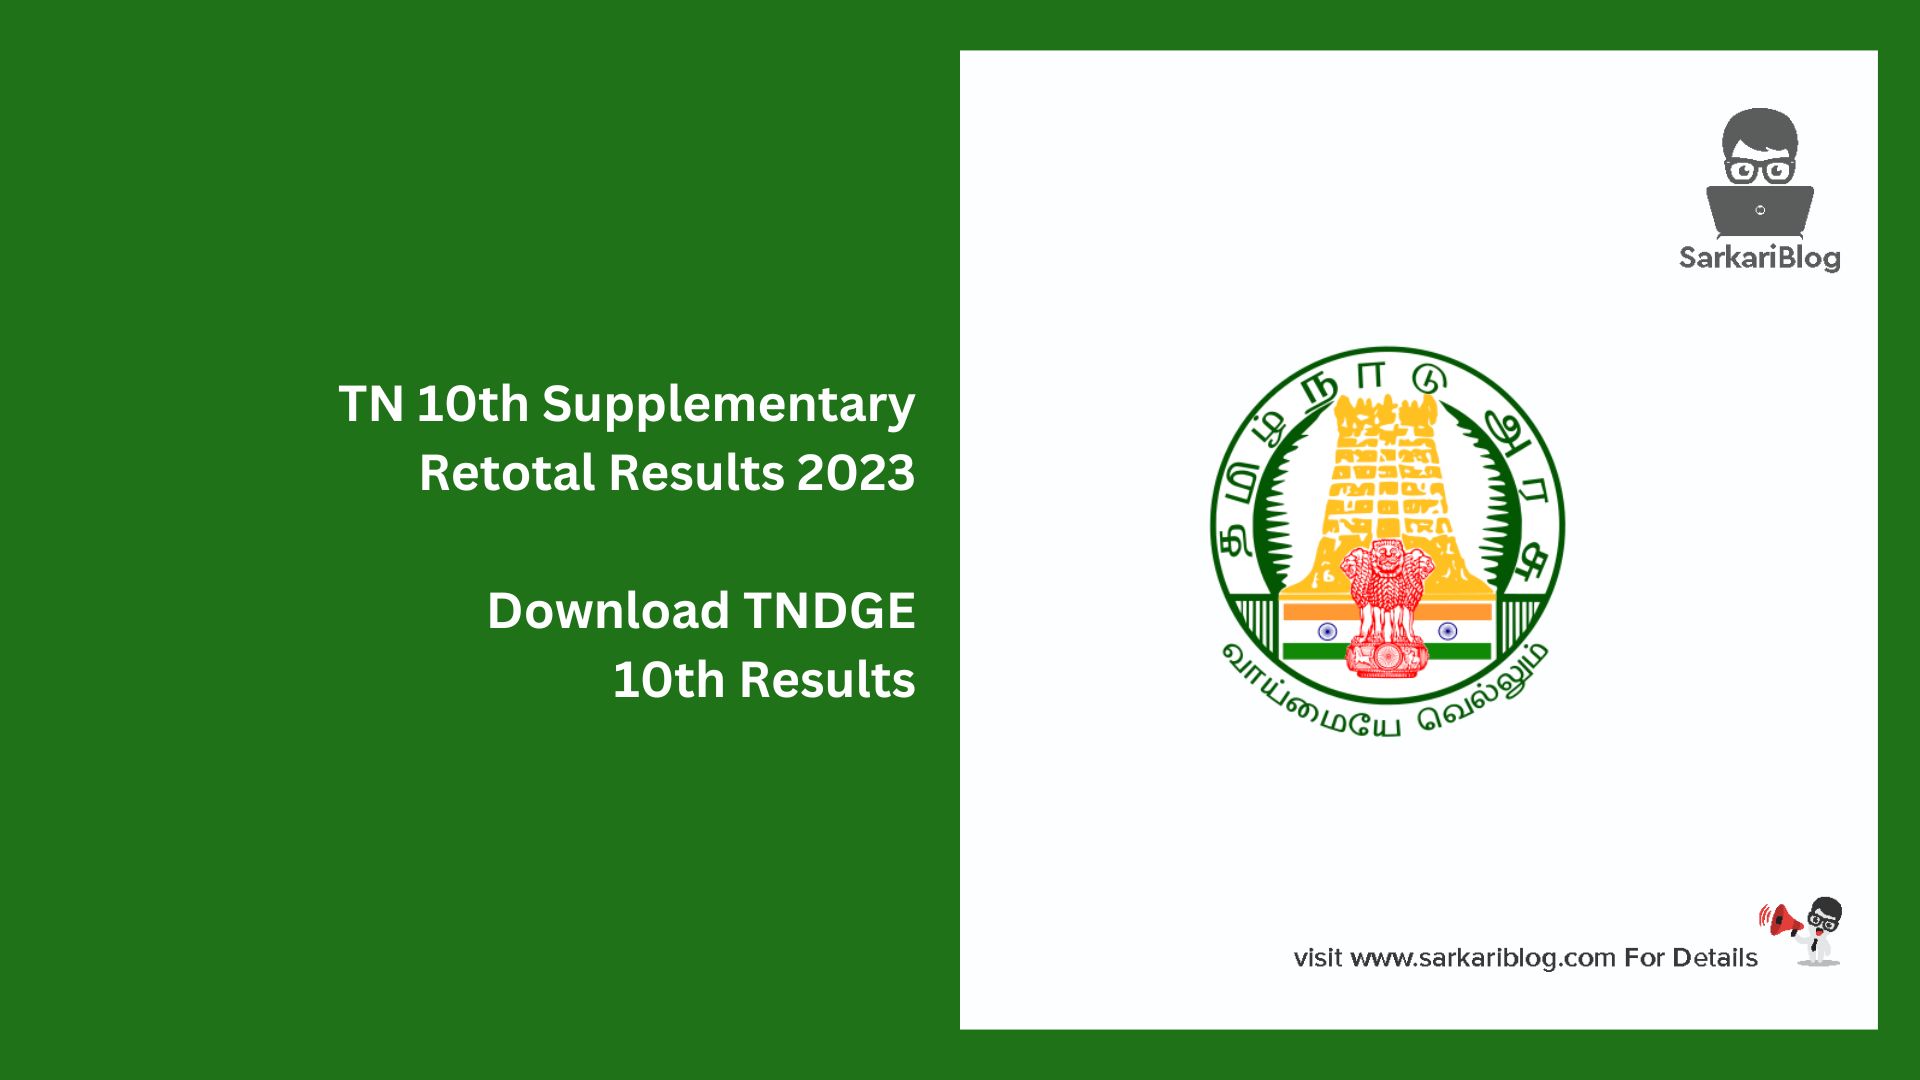 TN 10th Supplementary Retotal Results 2023